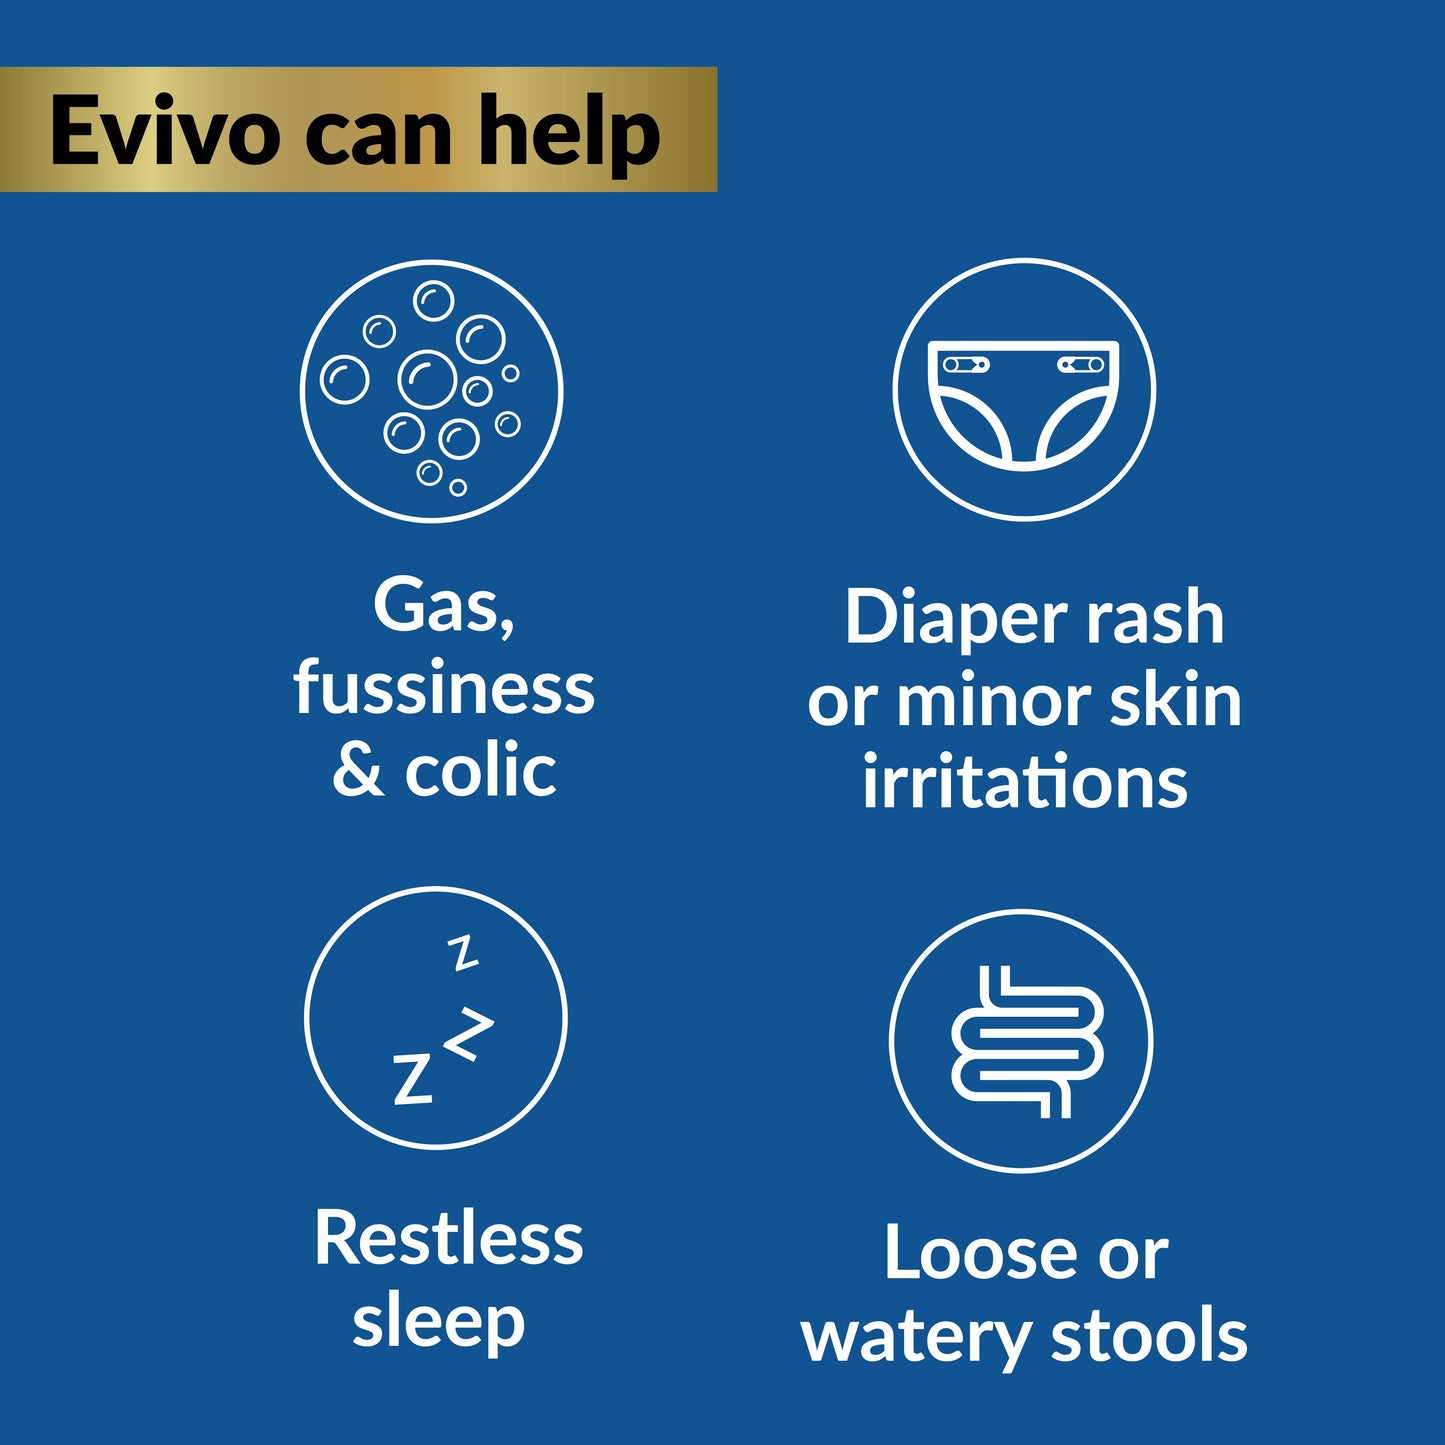 Evivo® Infant Powder Probiotic, includes 1-Month Supply